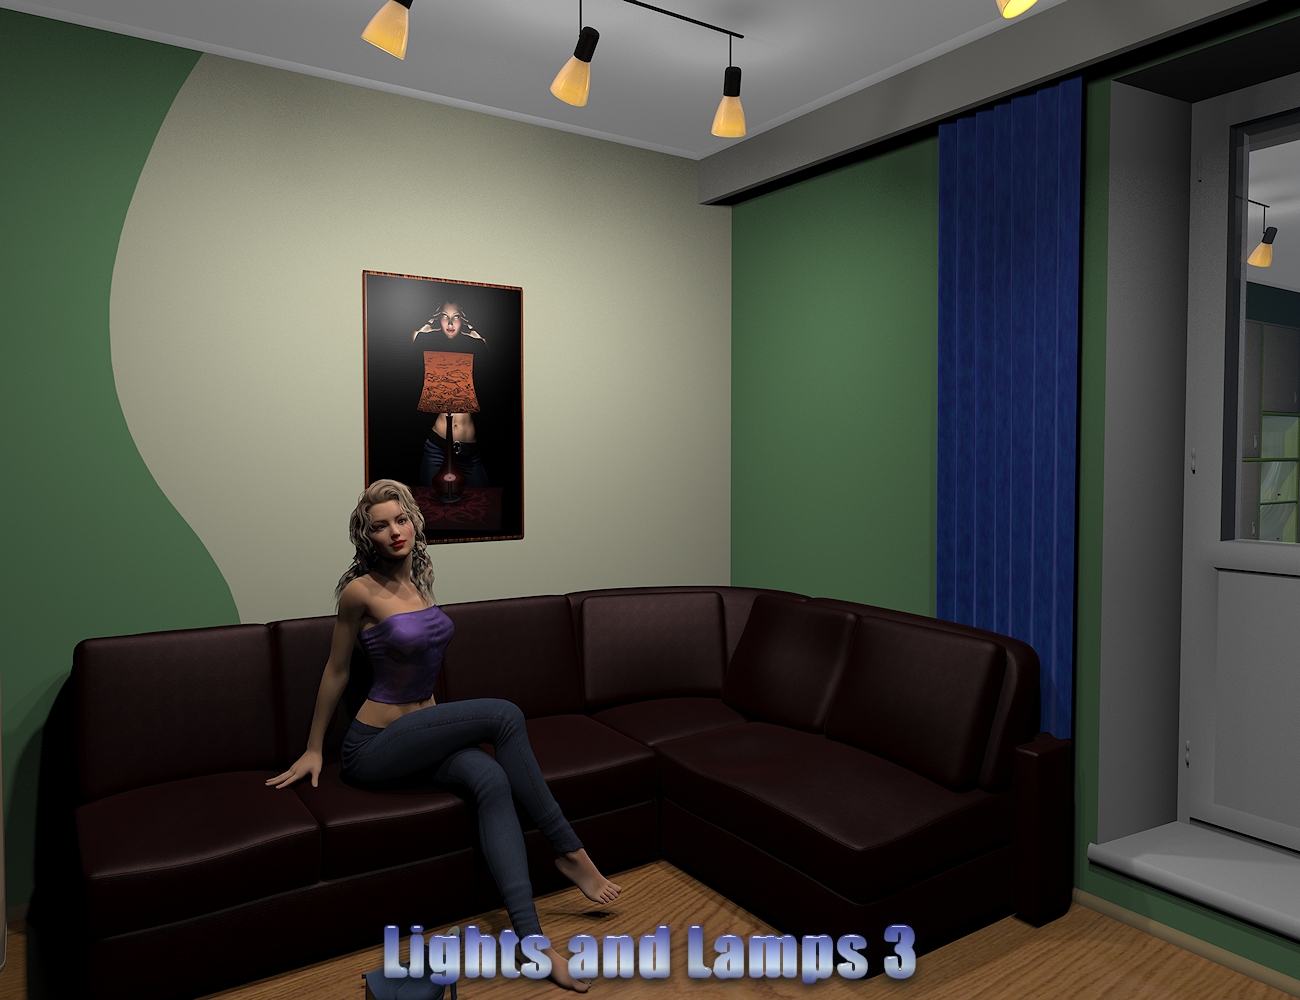 InaneGlory's Lights and Lamps 3 - Ceiling and Wall Lamps by: IDG DesignsInaneGlory, 3D Models by Daz 3D